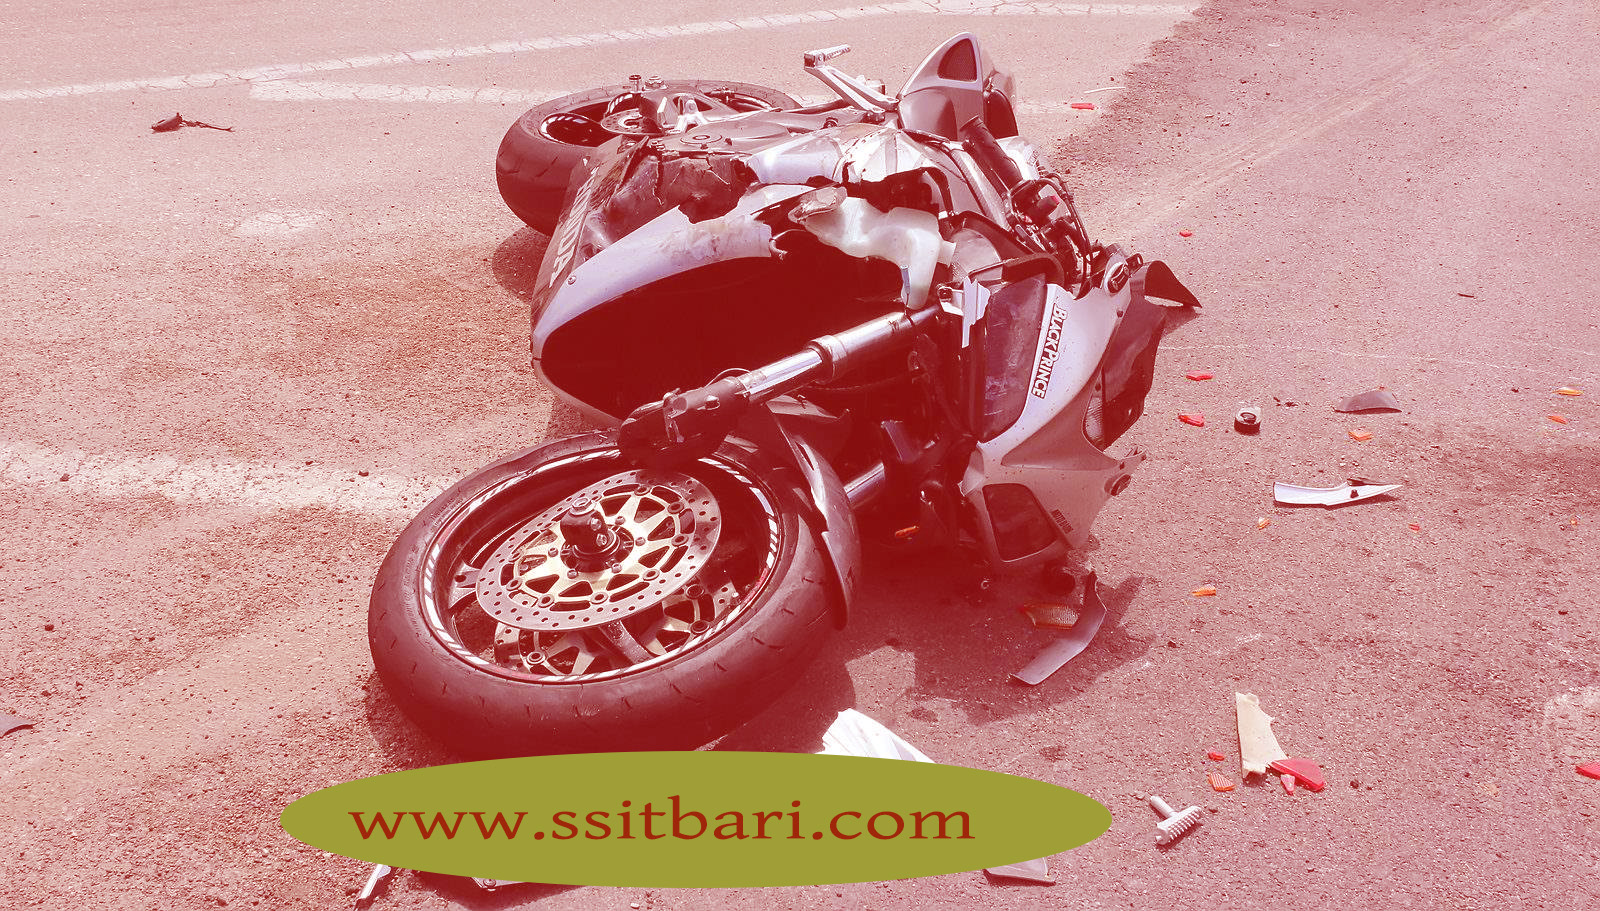 Motorcycle Accident Lawyer near Me 2023